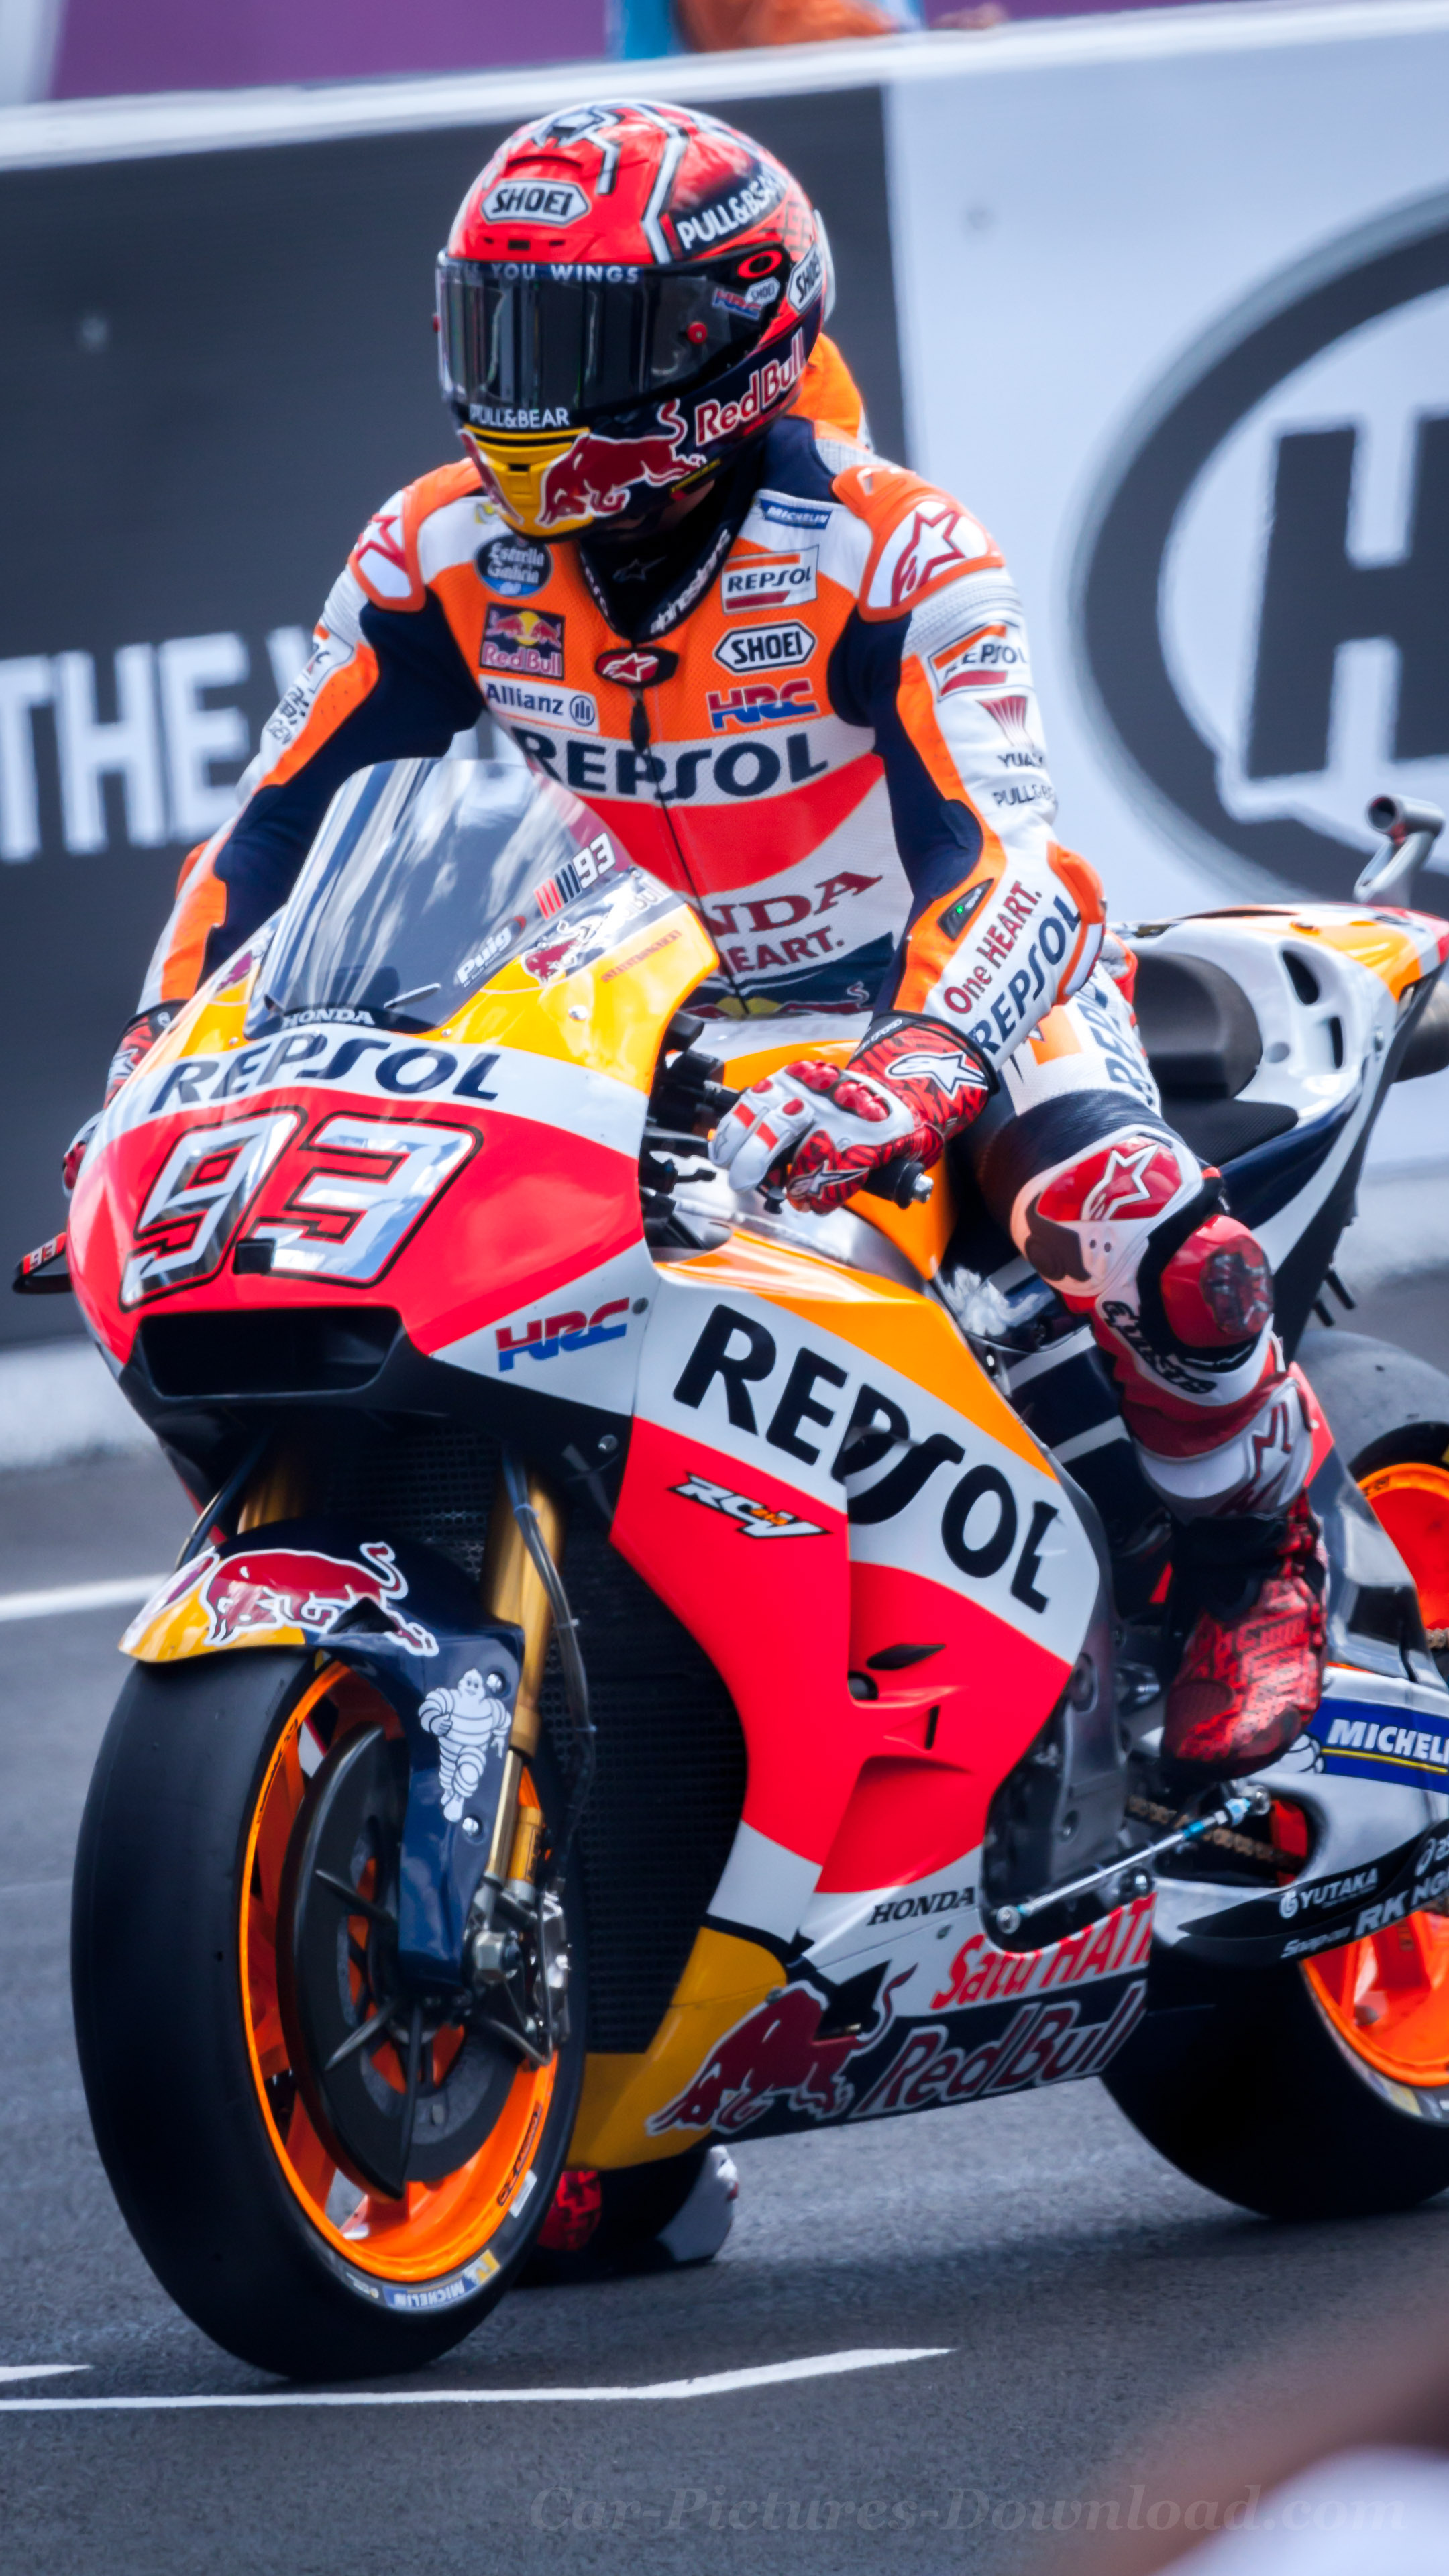 Motorcycle Racing: Starting Position, Superbike, Checking All Systems, Honda Superbike. 2160x3840 4K Background.